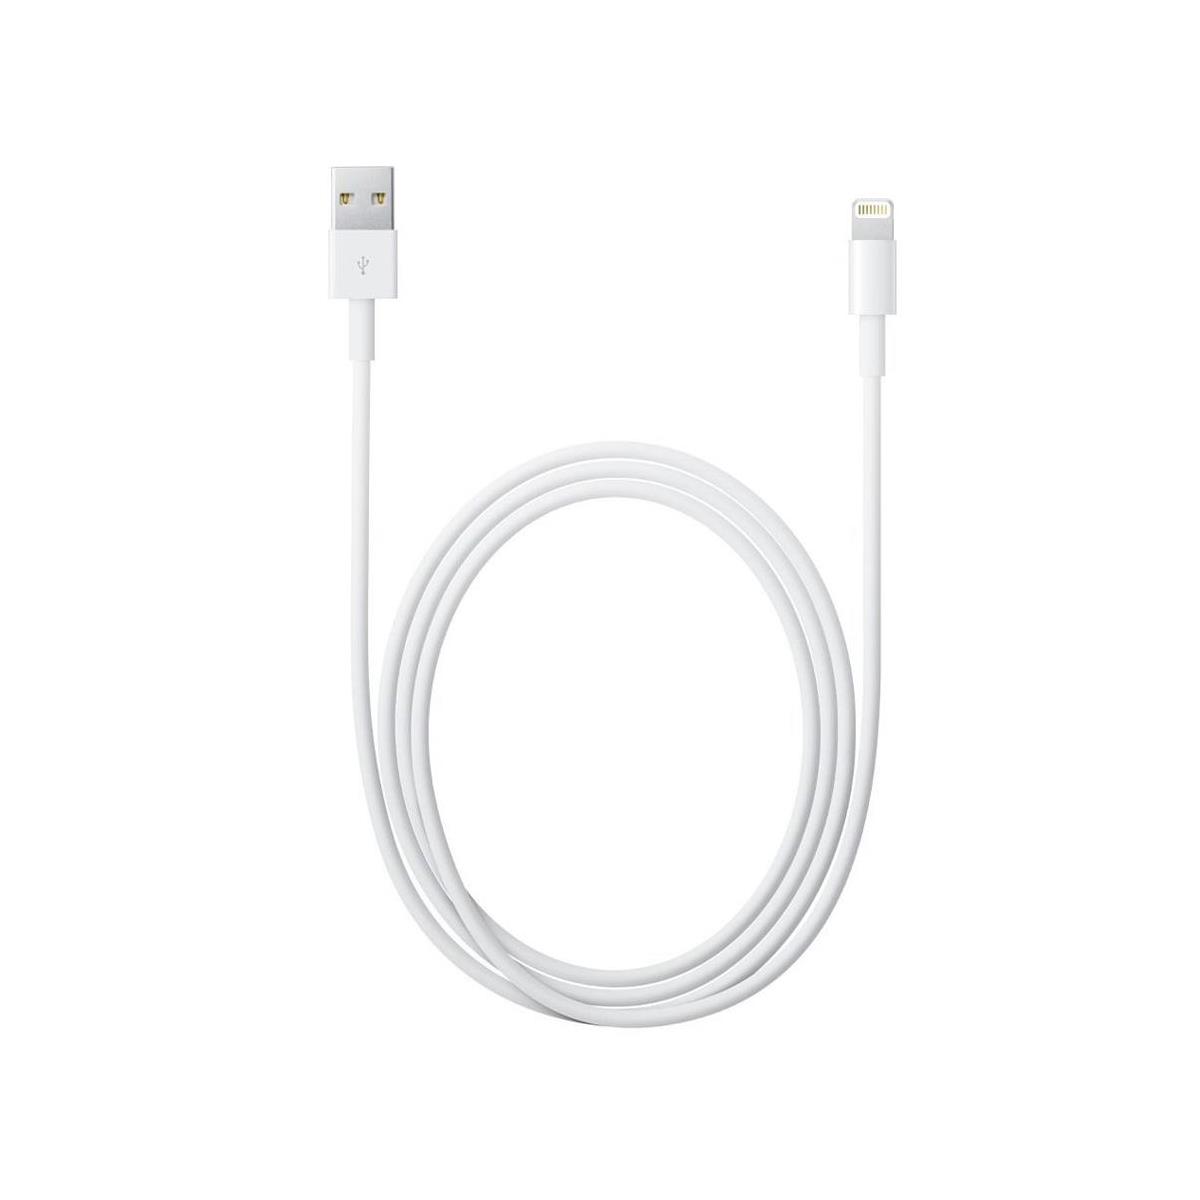 Image of Apple Lightning to USB Cable - 2m (6.56')